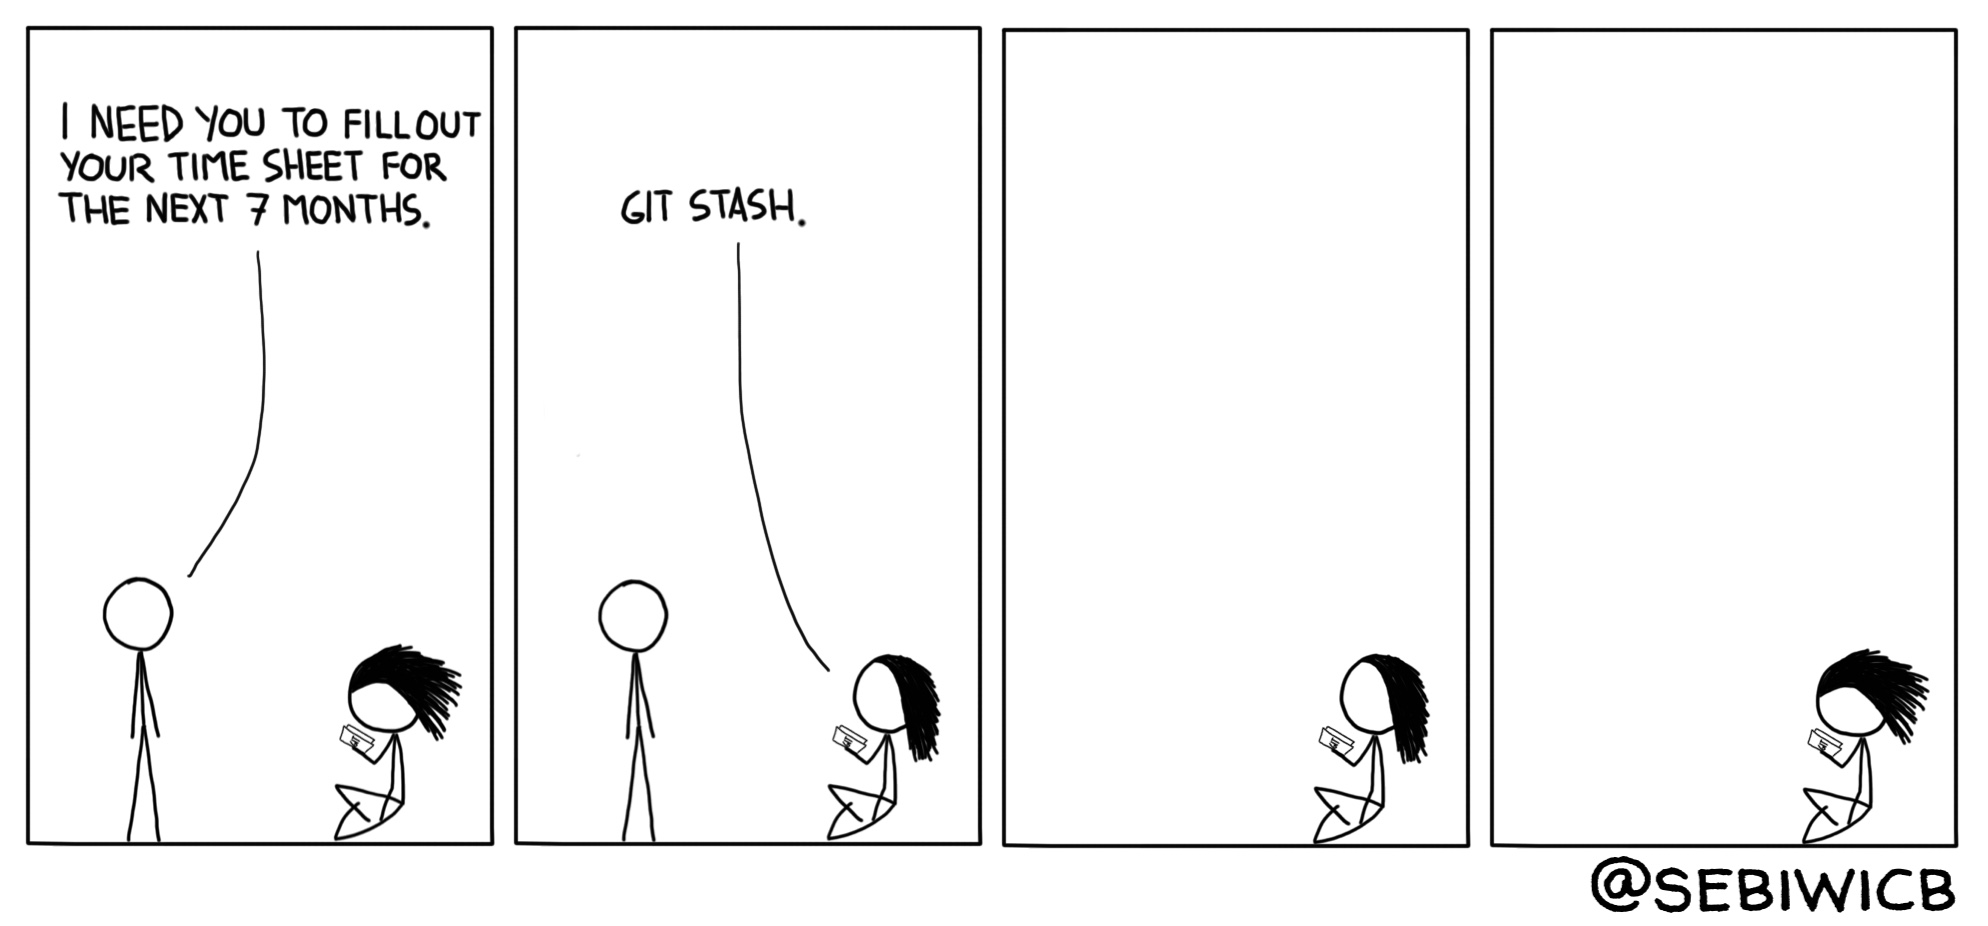 Wouldn't it be cool if we could use git in real life?